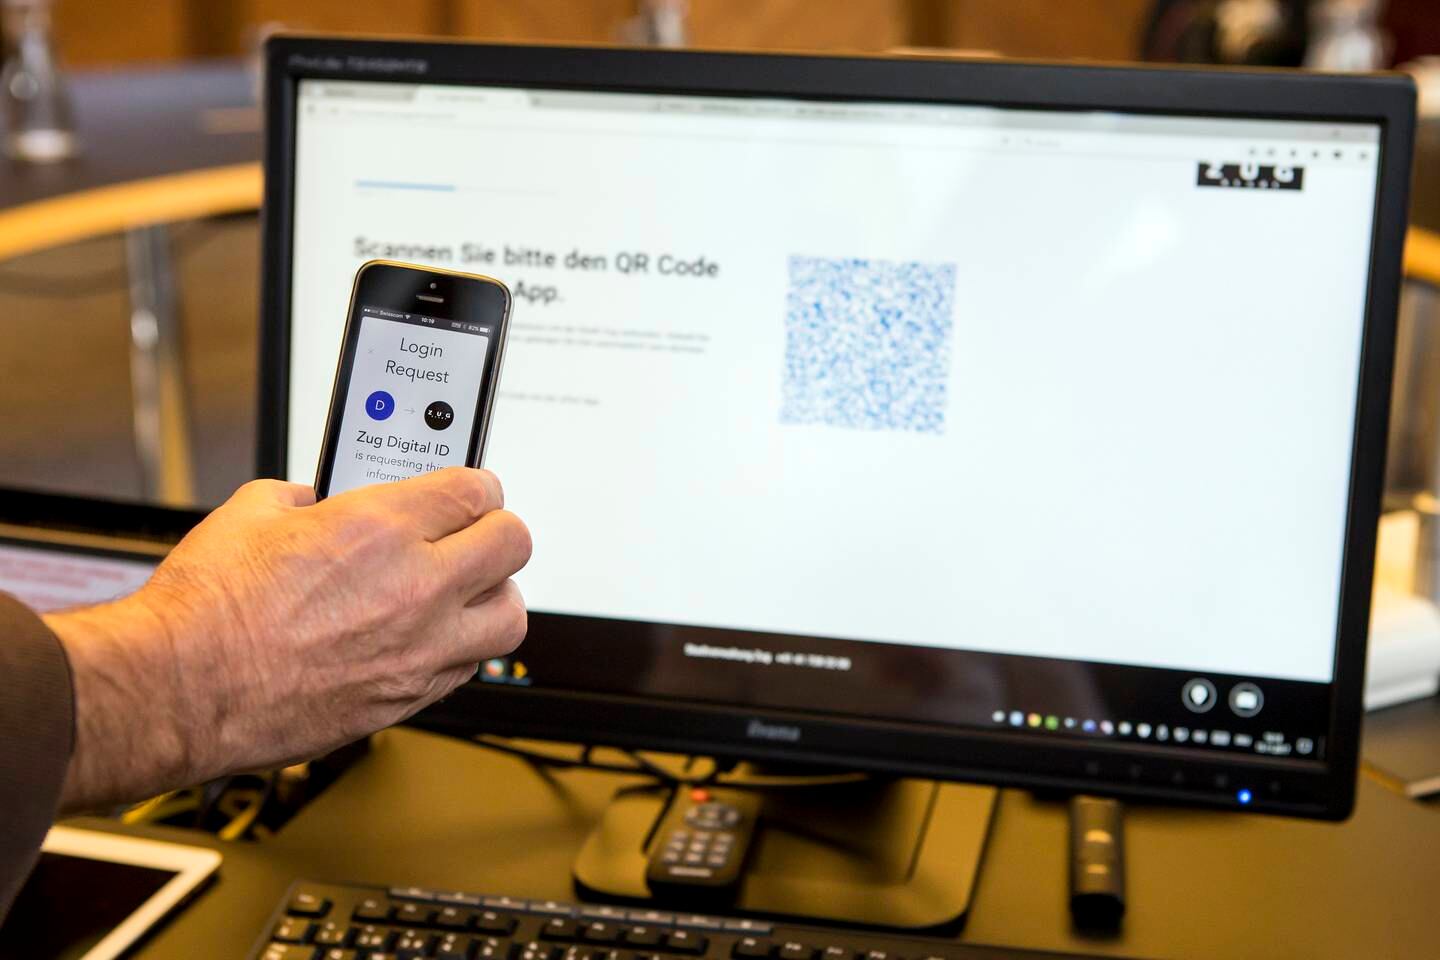 epa06330660 A mobile phone and a computer screen are seen during the demonstration of a blockchain-based digital ID in Zug, Switzerland, 15 November 2017. The city of Zug now offers all residents the opportunity to get a digital identity. This is based on an app and is linked to the Ethereum Blockchain.  EPA/ALEXANDRA WEY